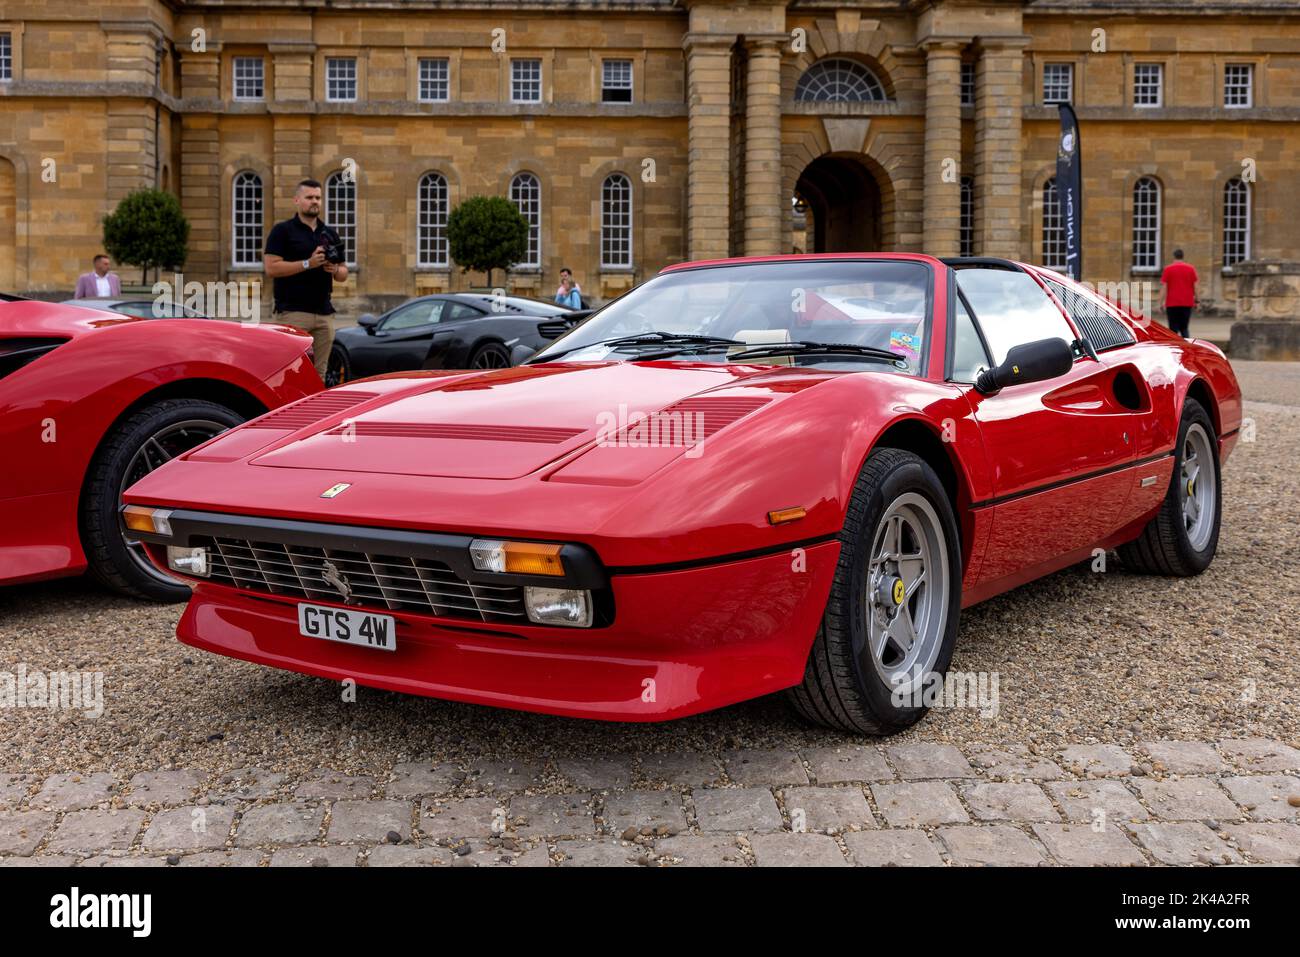 1984 Ferrari 308 GTS ‘GTS 4W’ on display in the Great Court at Blenheim Palace on the 4th September 2022 Stock Photo